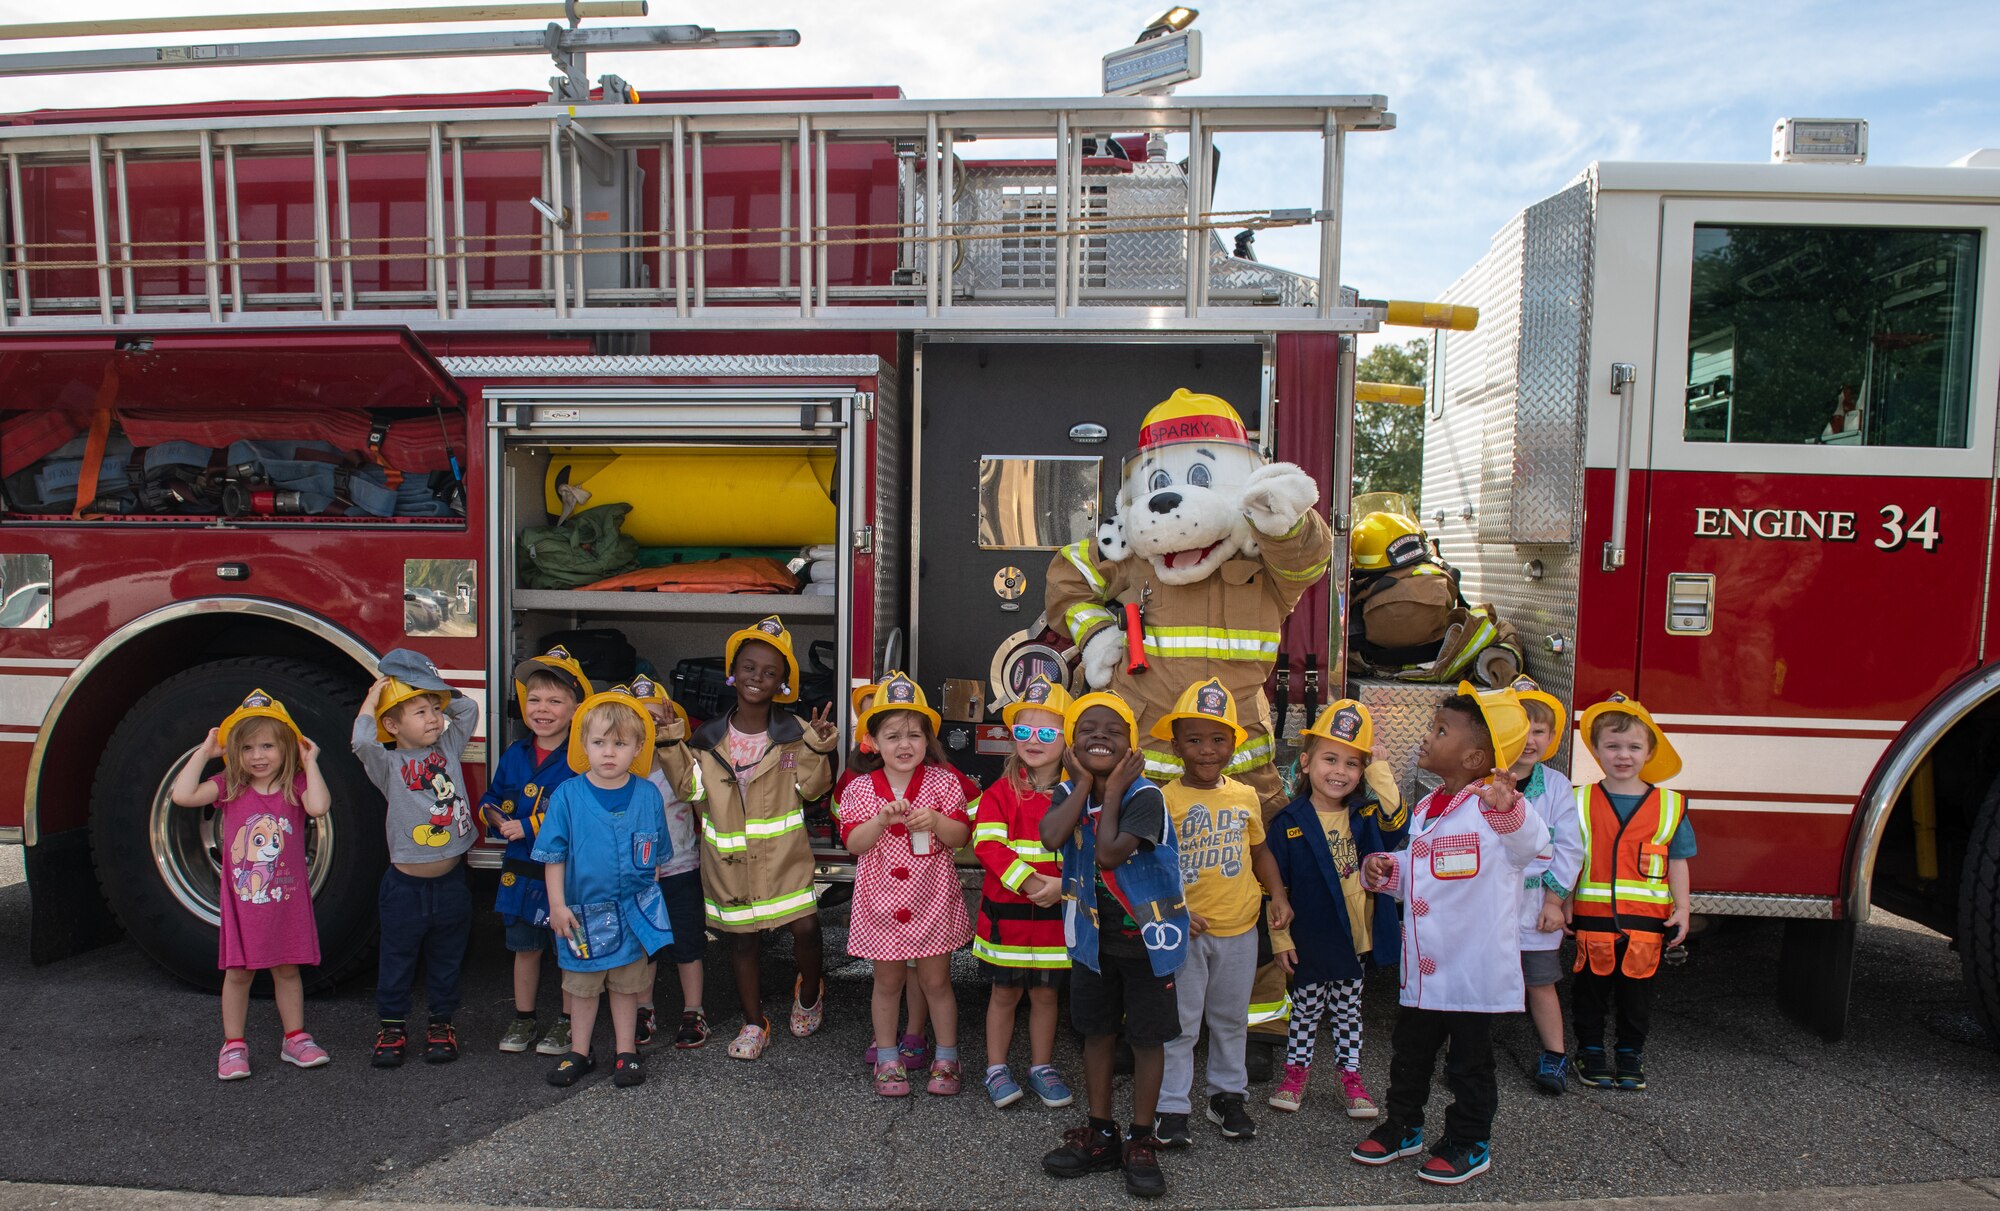 Children from the Child Development Center pose for a group photo with Sparky the fire dog, the official mascot of the National Fire Protection Association during the Fire Prevention Week tour at the CDC on Keesler Air Force Base, Mississippi, Oct. 13, 2022. Throughout the week the Keesler Fire Department conducted random fire drills, toured various facilities with Sparky the fire dog, passed out fire safety information and fire hats for children. (U.S. Air Force Photo by Andre' Askew)